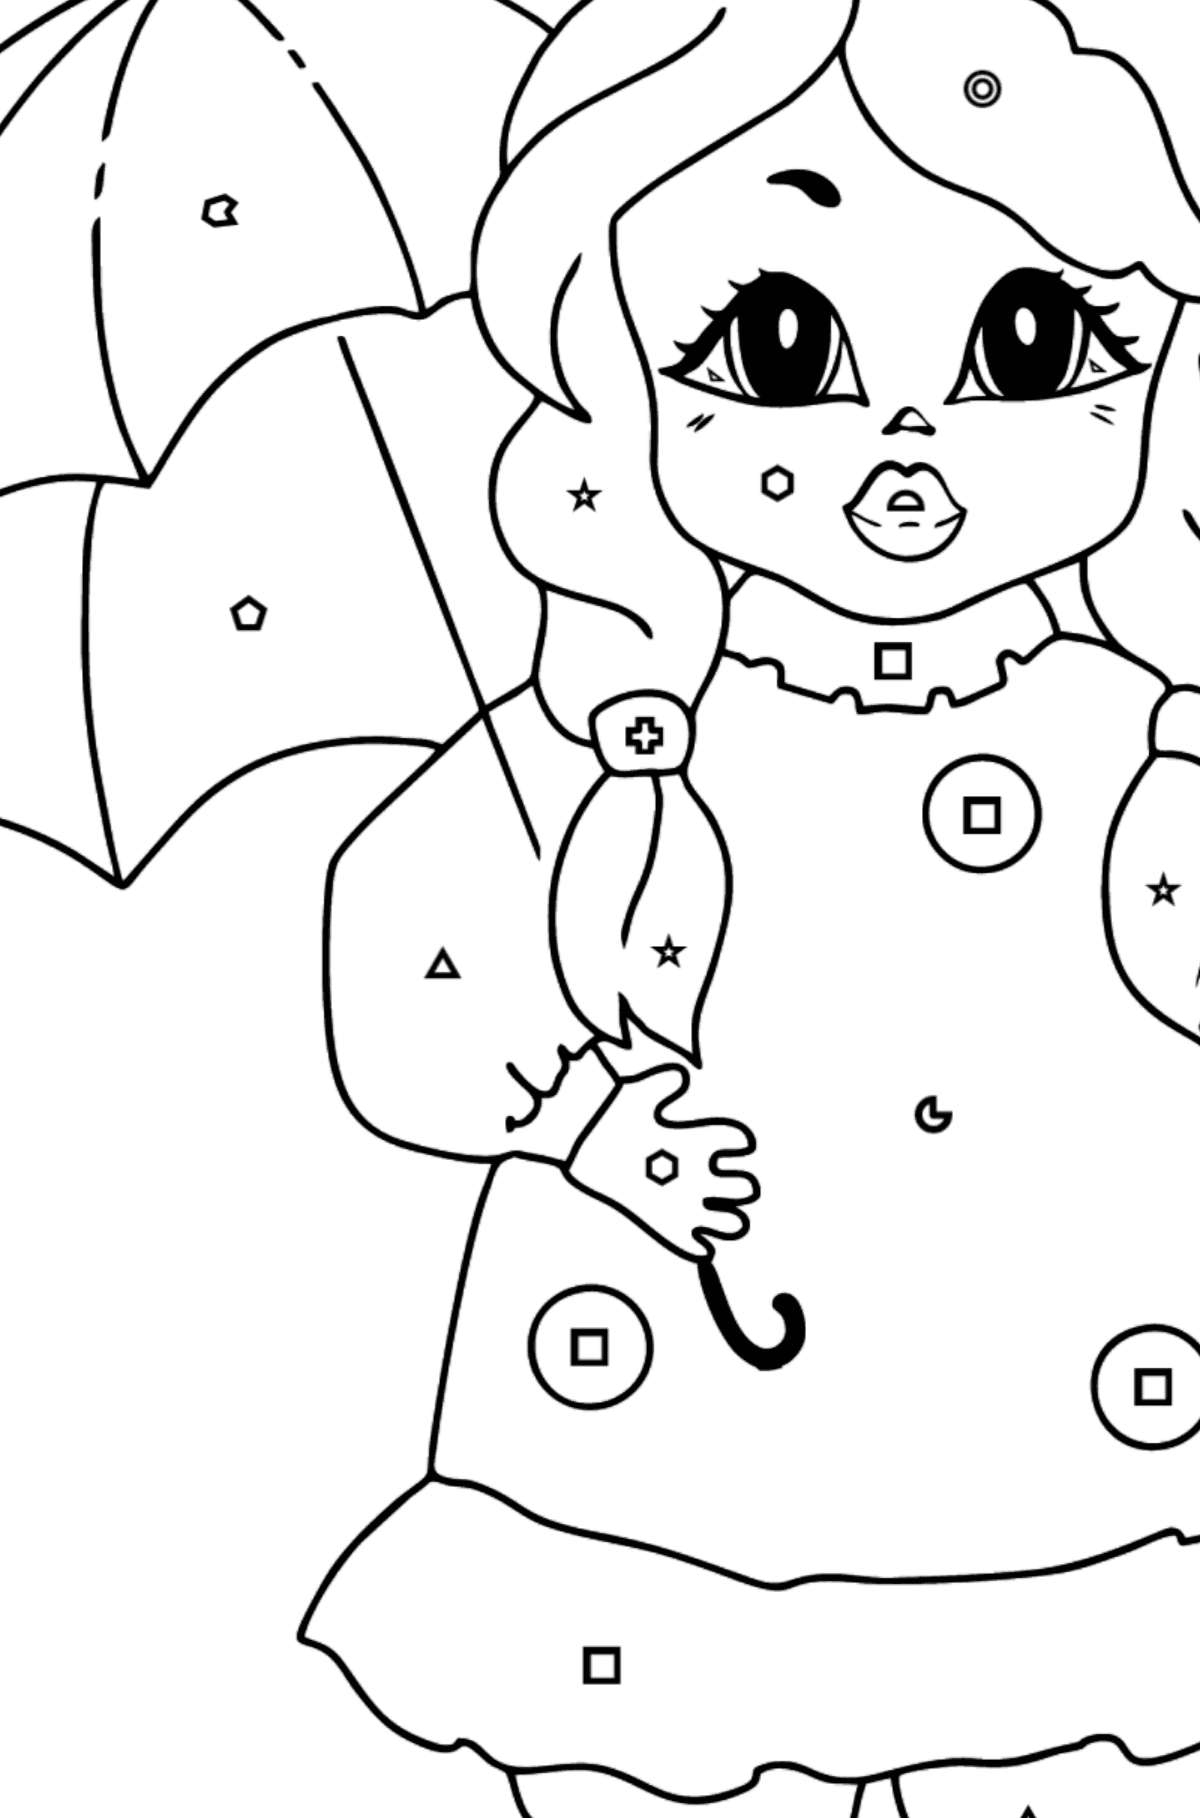 Funny princess coloring page - Coloring by Geometric Shapes for Kids